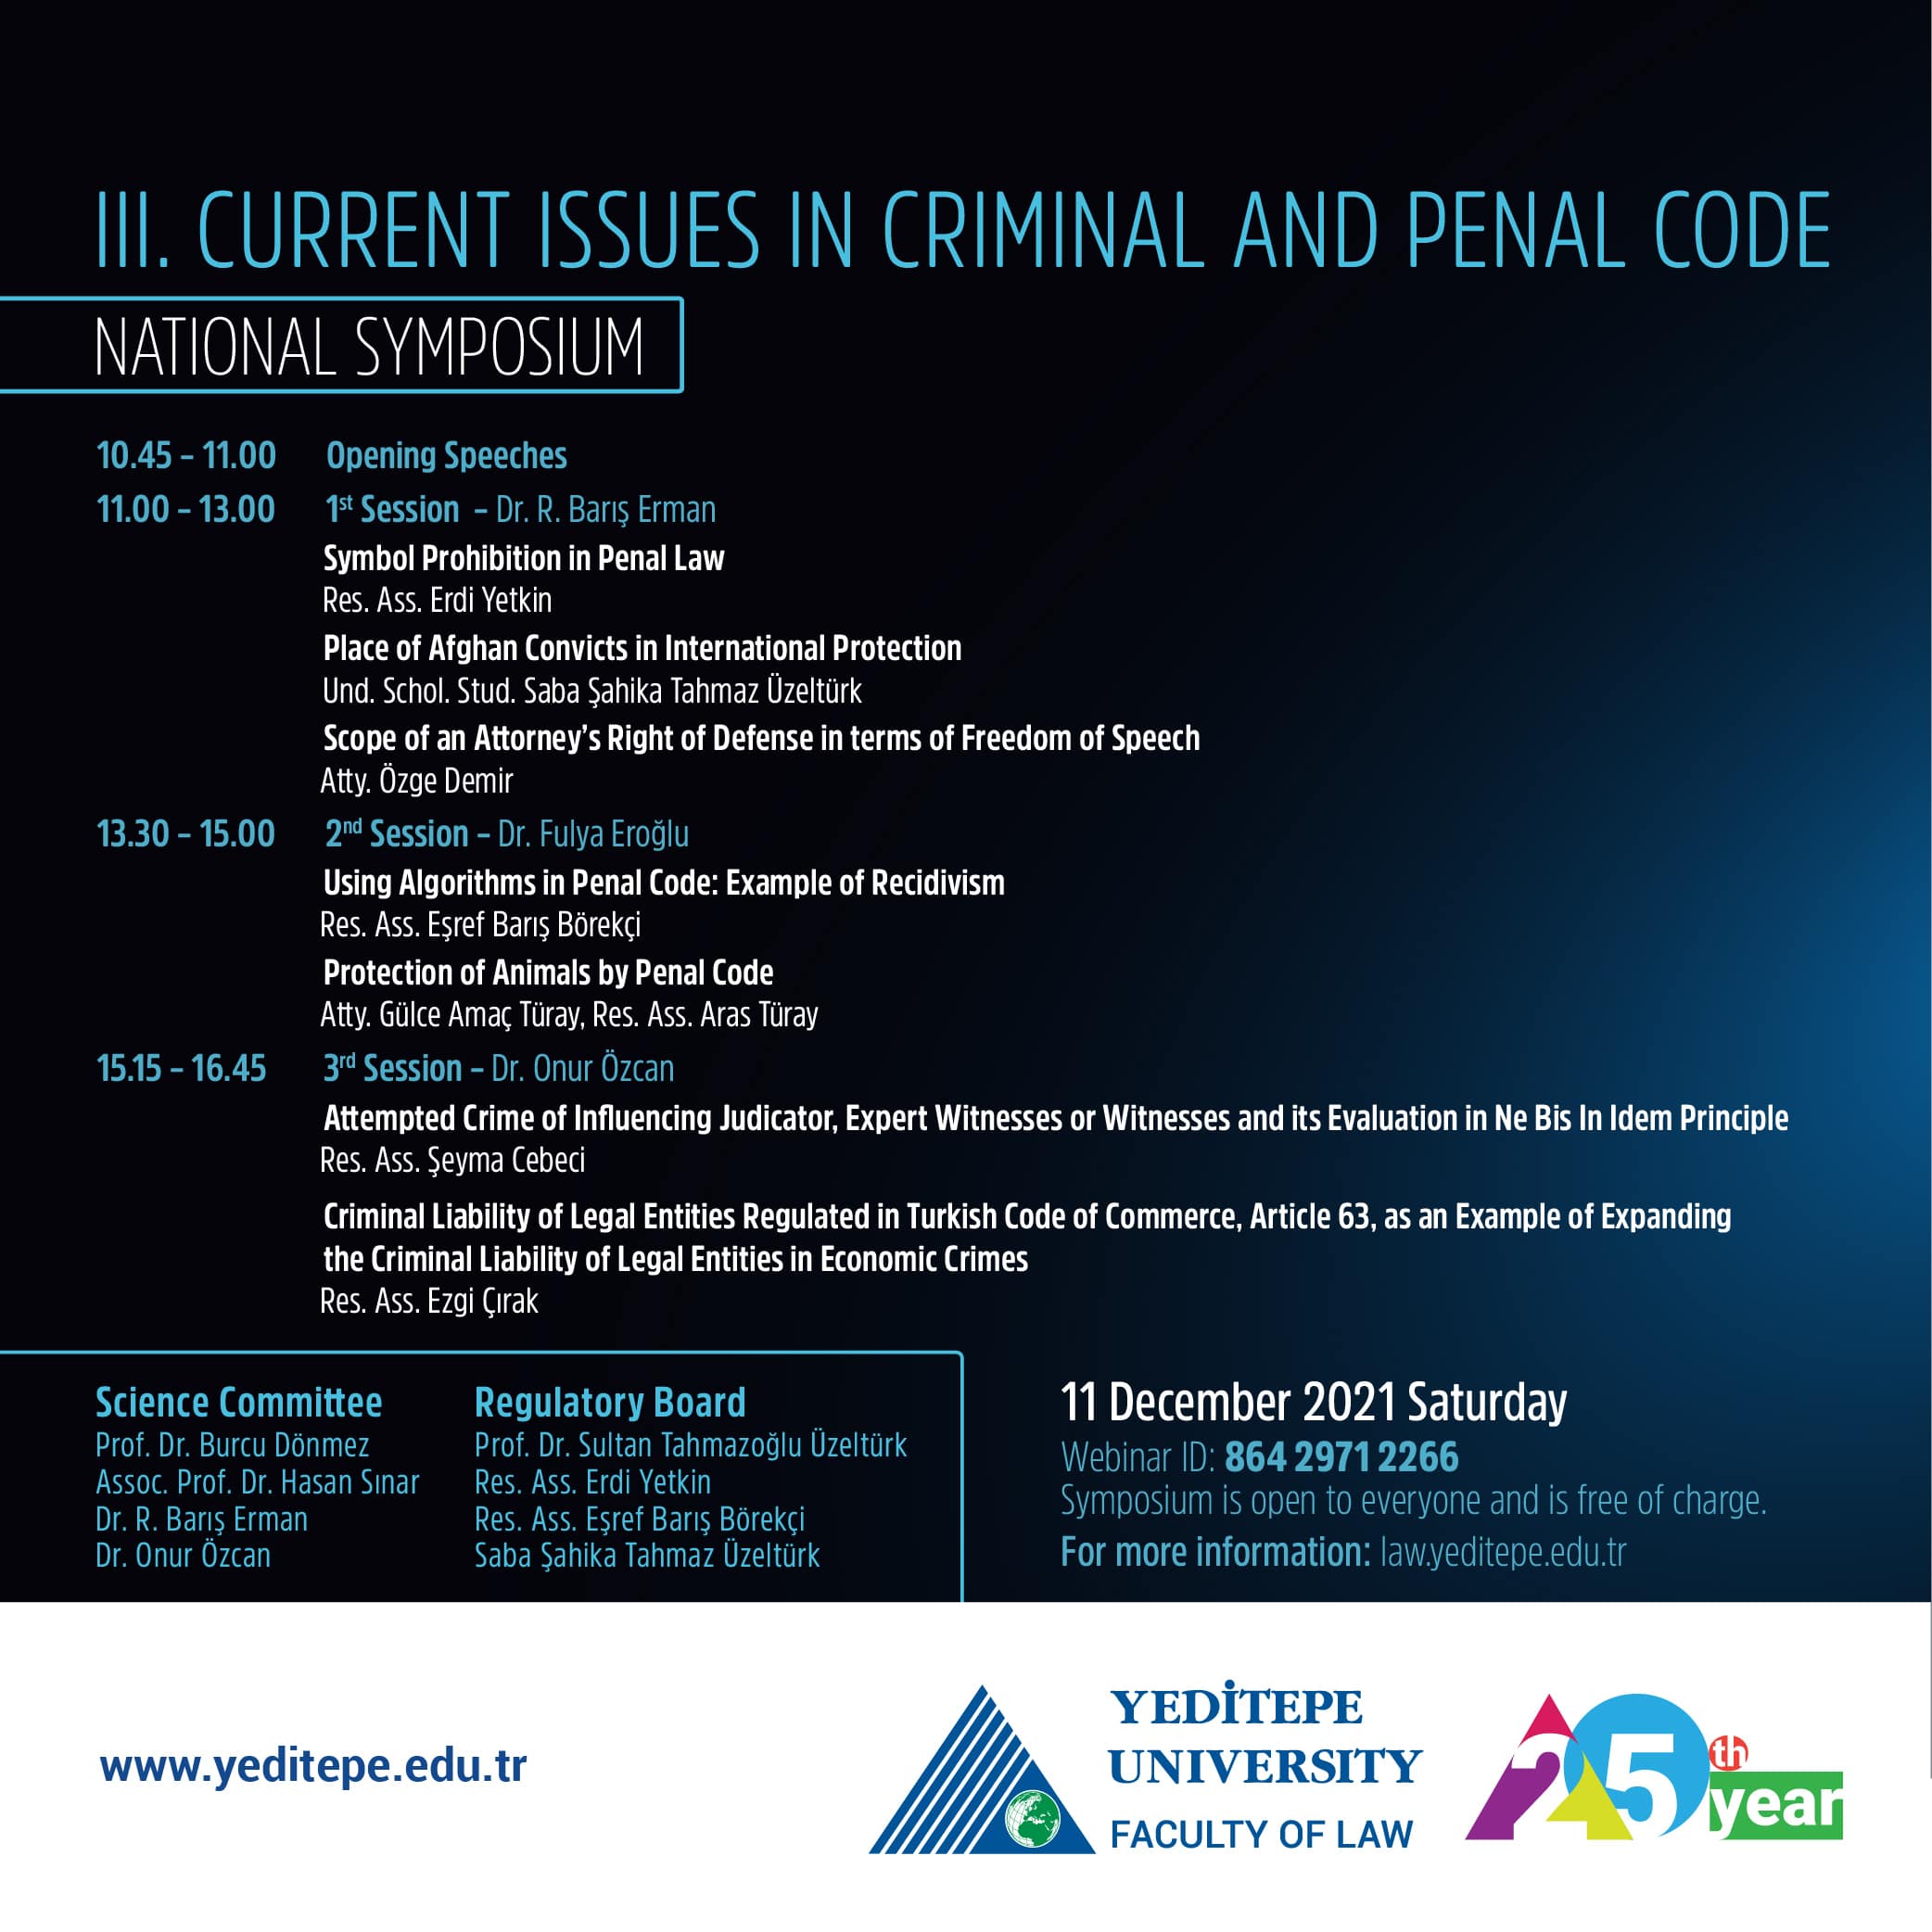 3. Current Issues In Criminal and Penal Code